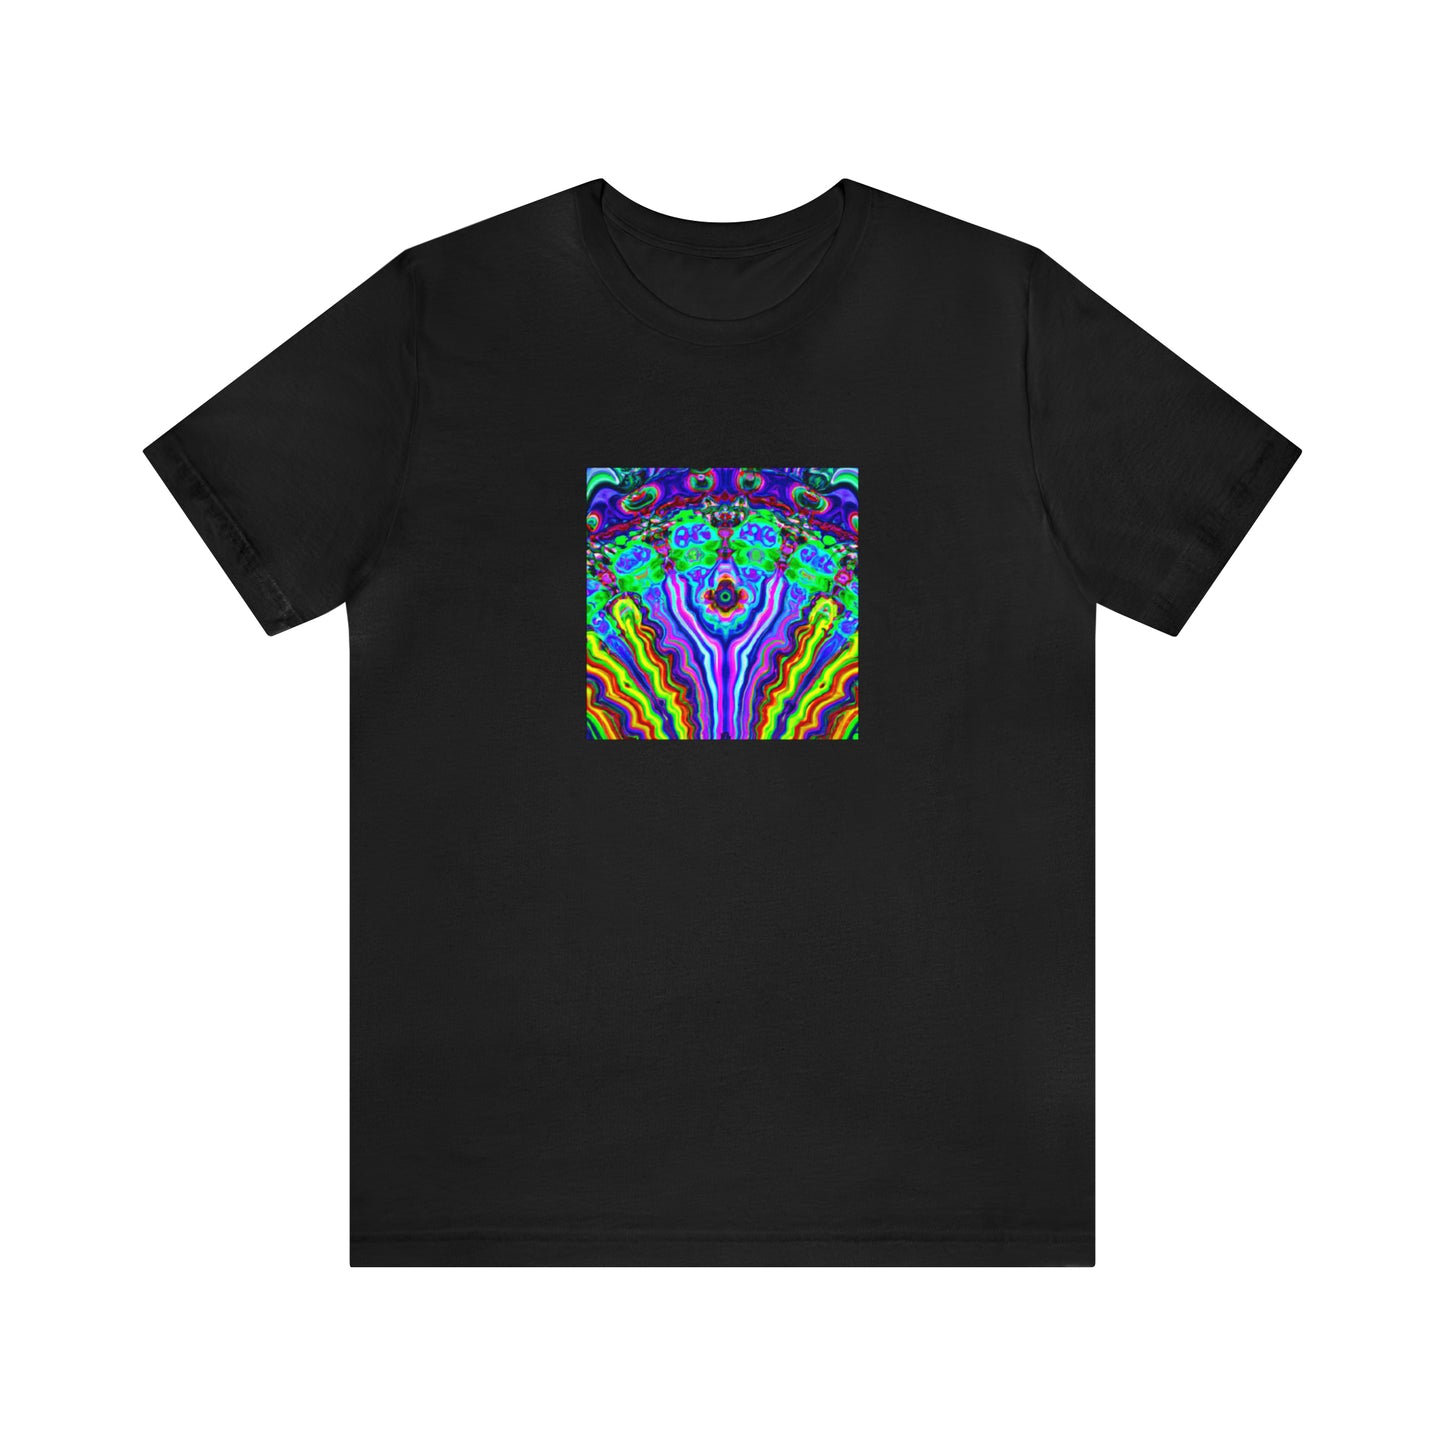 Victor "Vintage" Valentino - - Psychedelic Trippy Pattern Tee Shirt